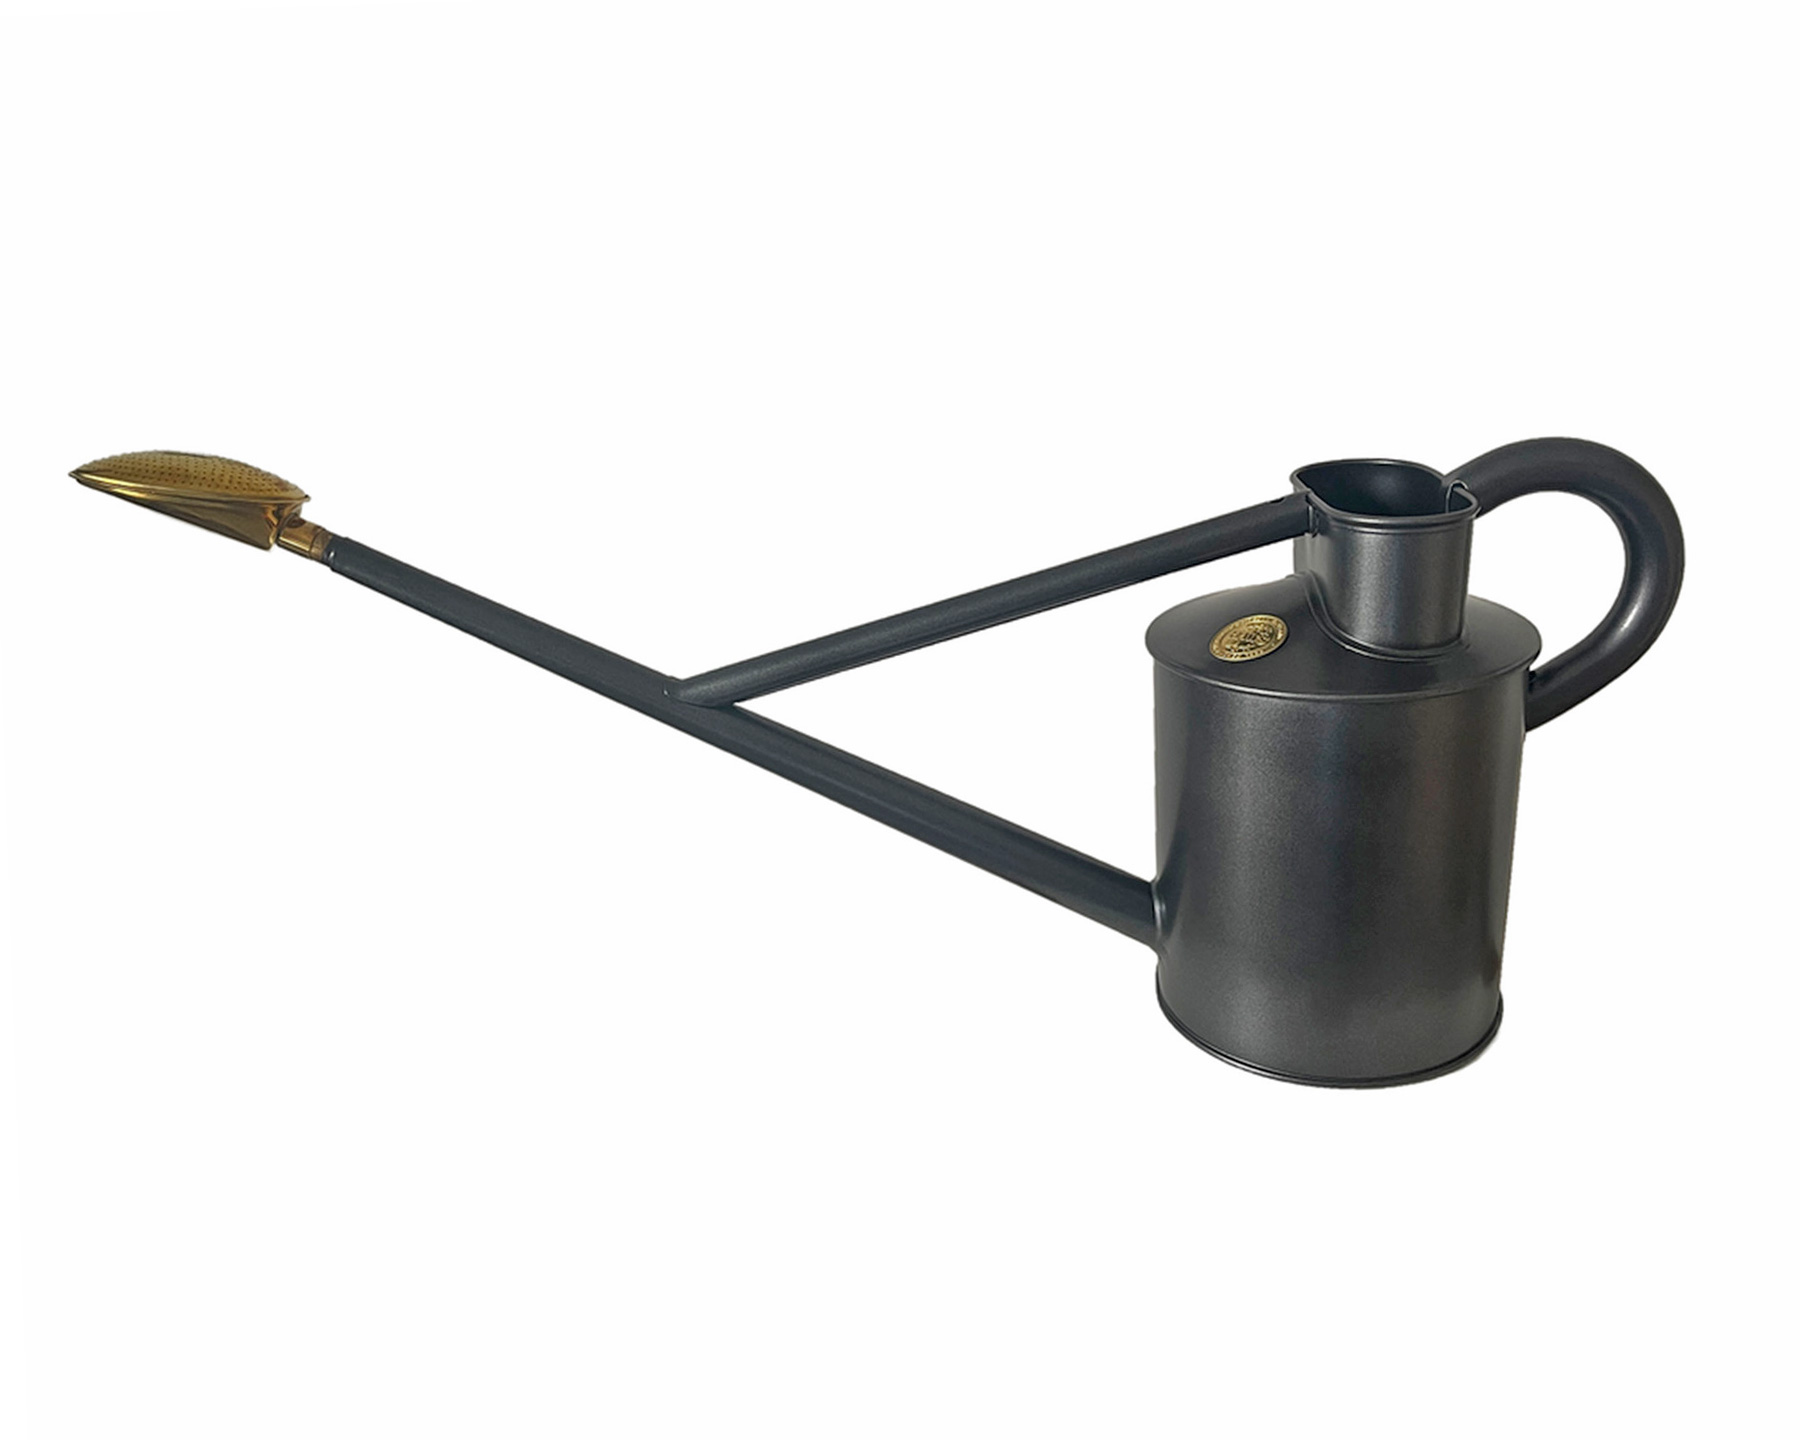 Warley Fall 1 gallon (4.5 litre) longreach watering can by Haws- now available in Graphite